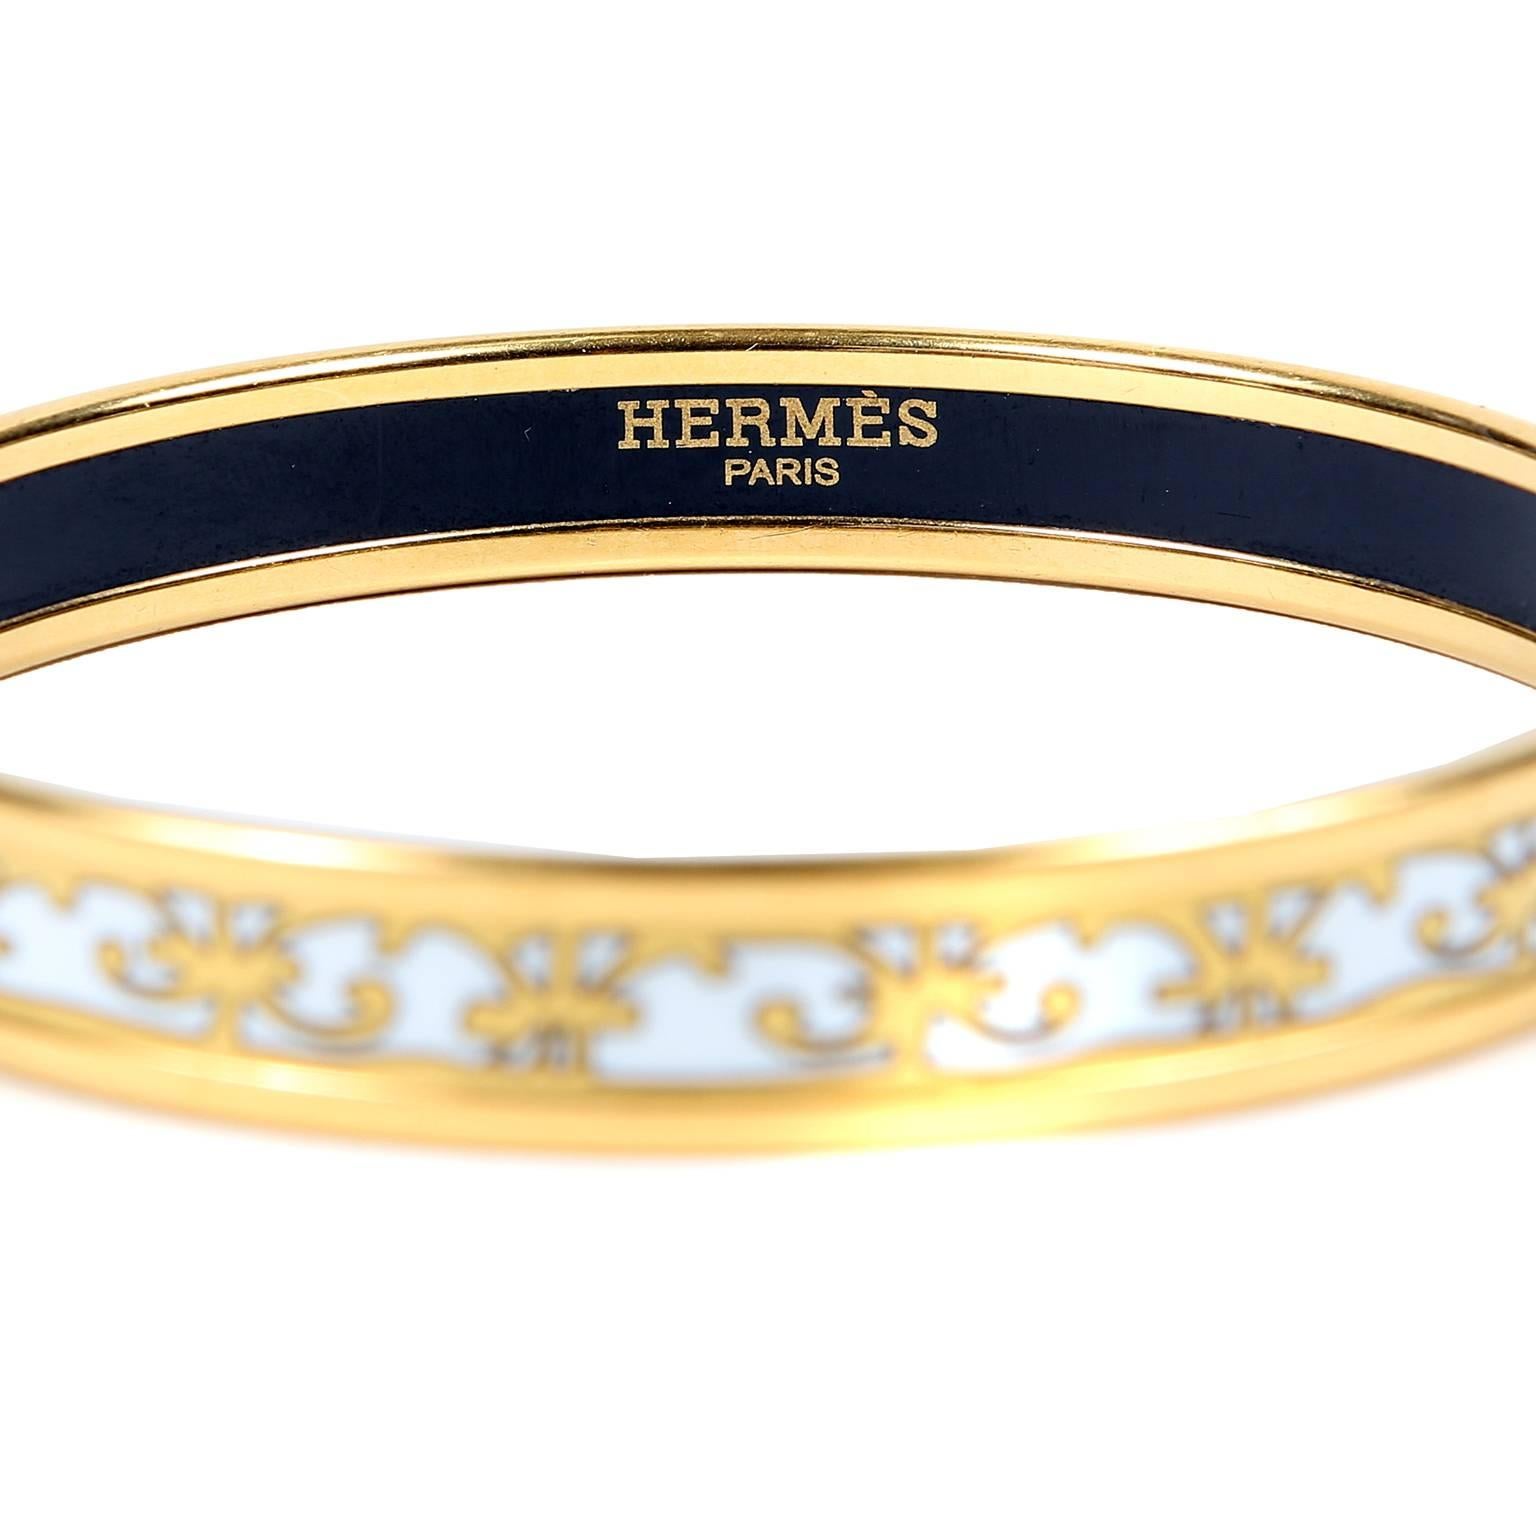 Hermès White Enamel Thin Bangle Bracelet is in excellent condition.  Feminine scrolled pattern in white and gold enamel with gold hardware. Made in France.
A099